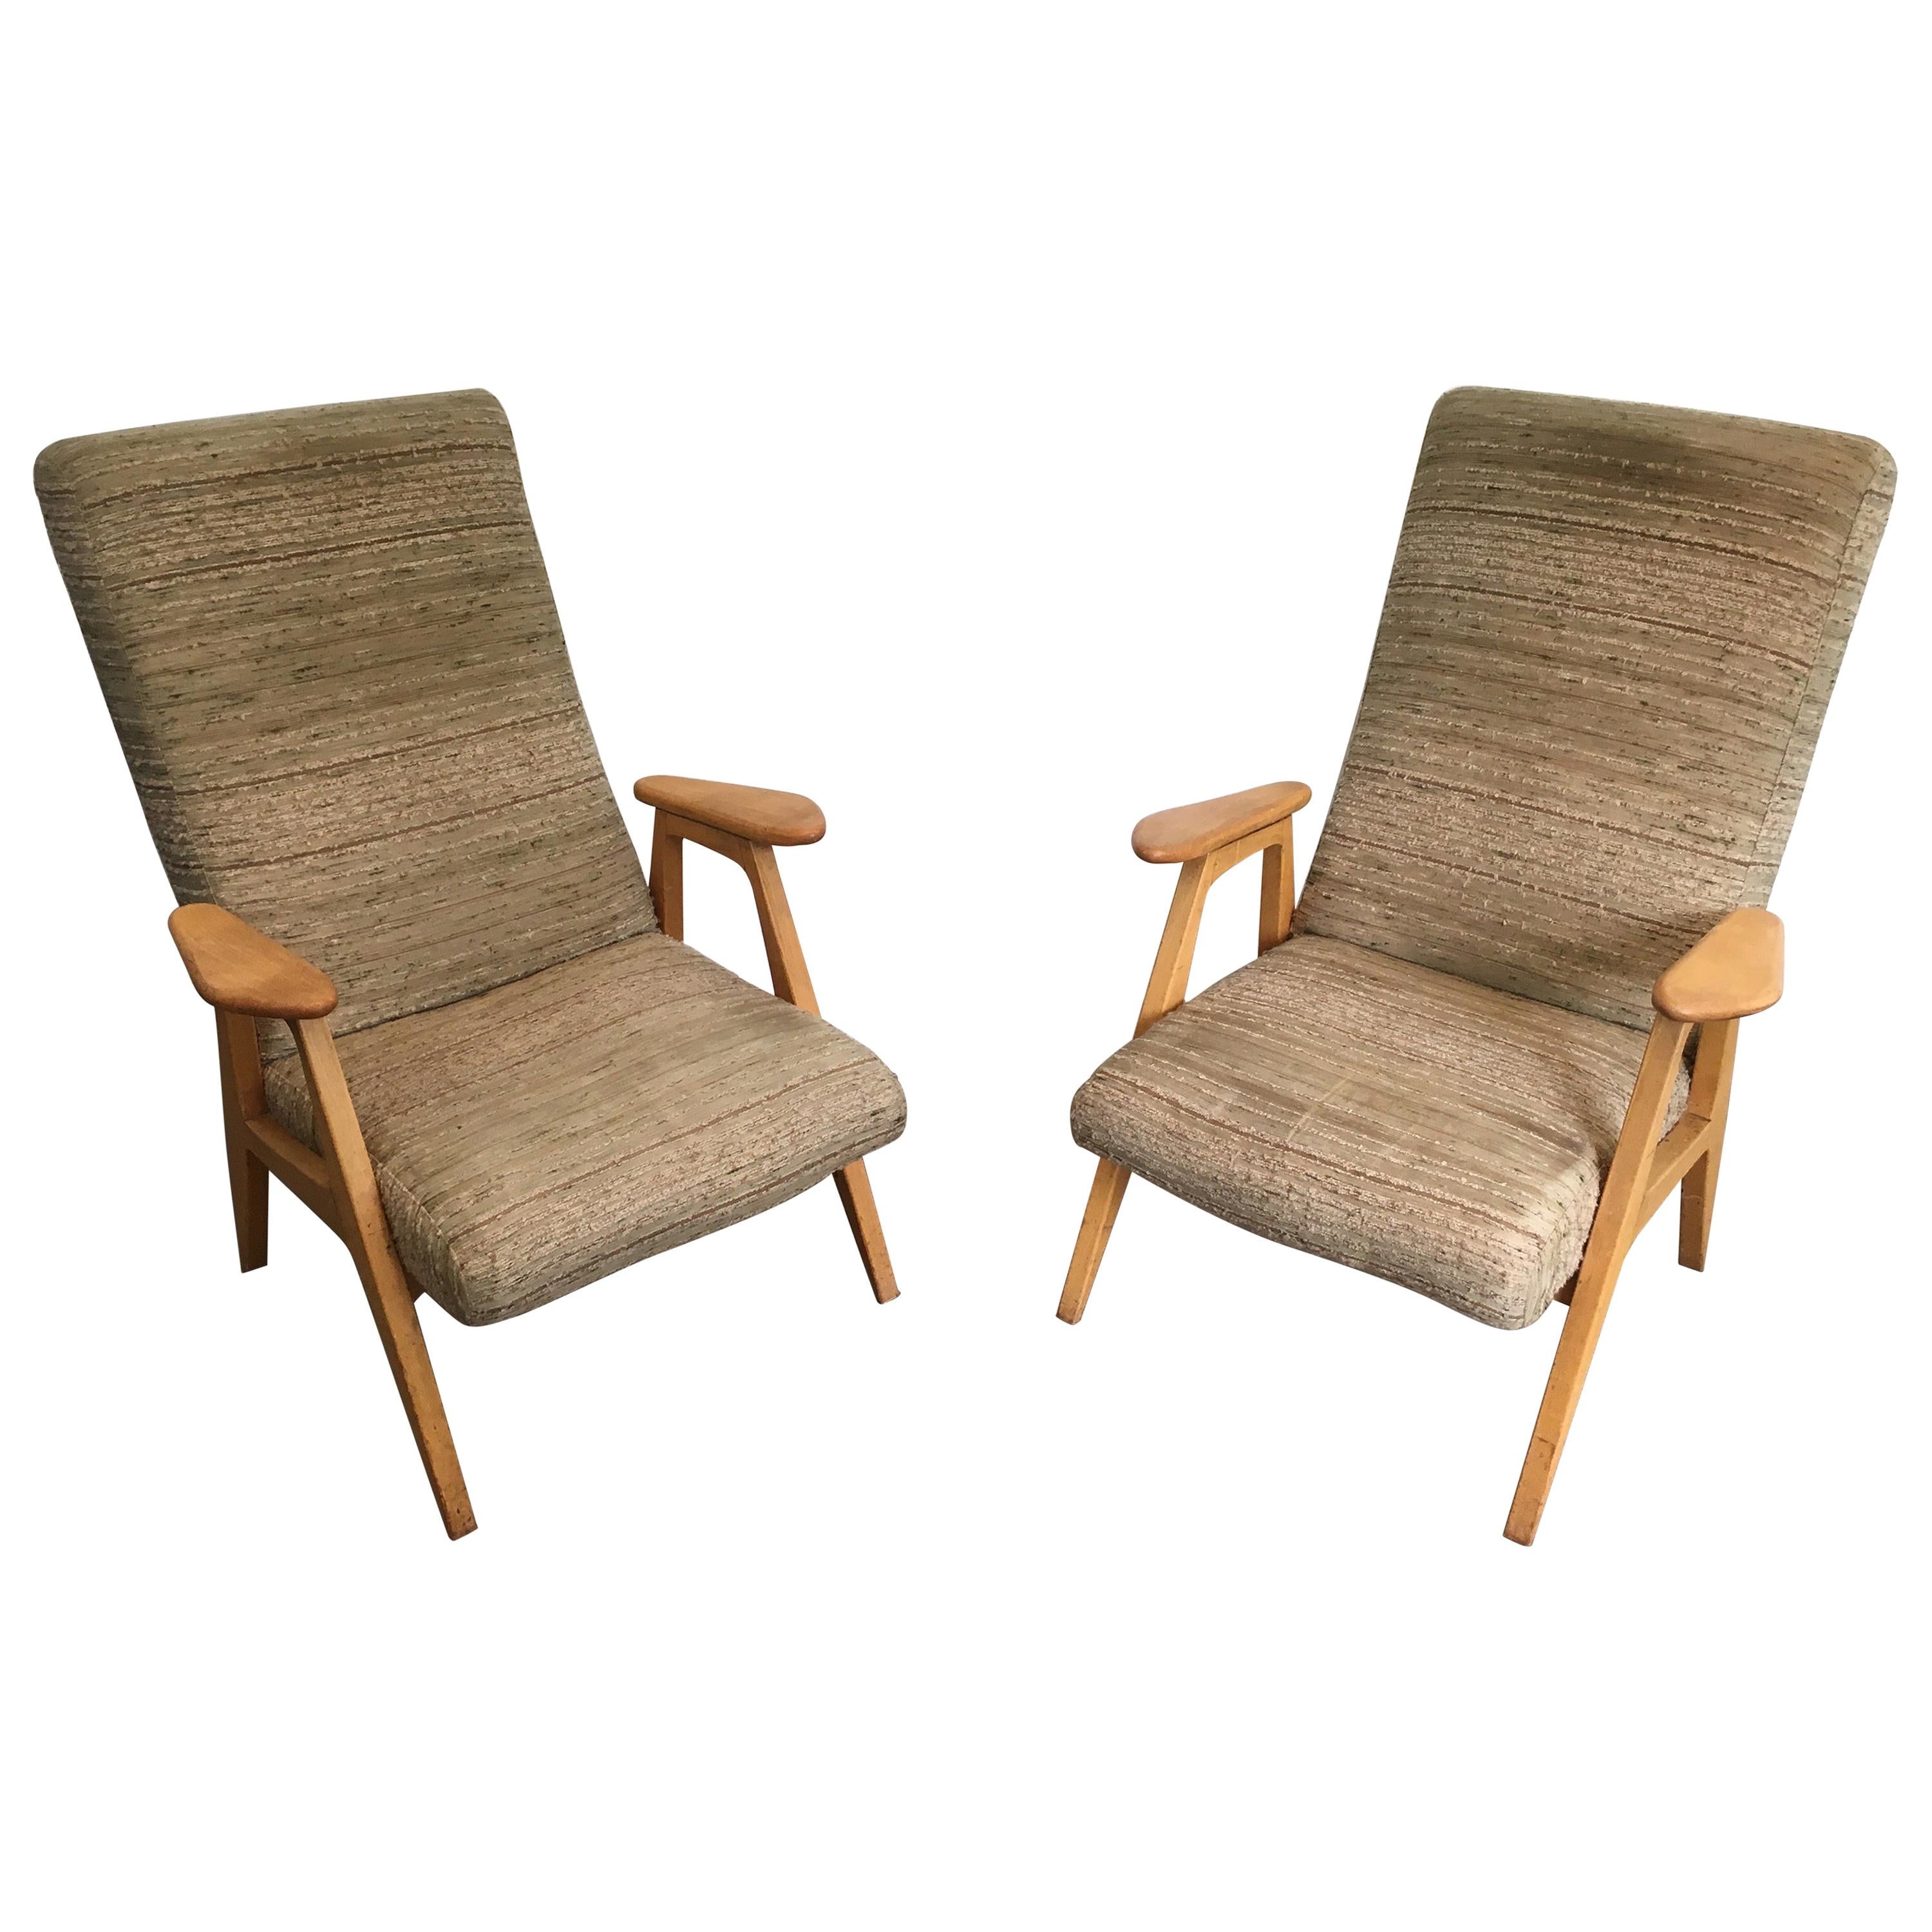 Pair of Vintage Armchairs, French, circa 1970